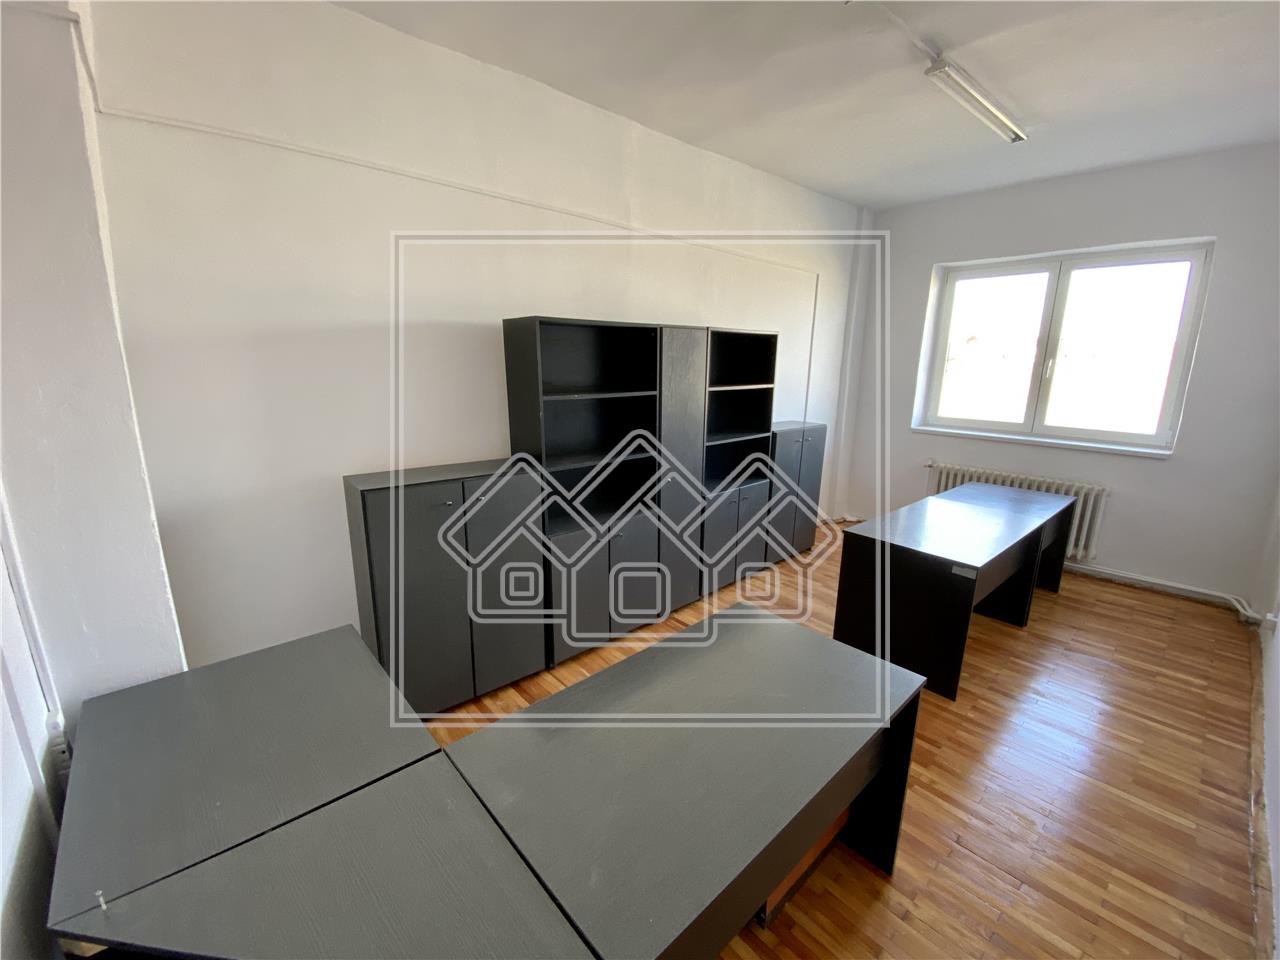 Office space for rent in Sibiu - recently renovated